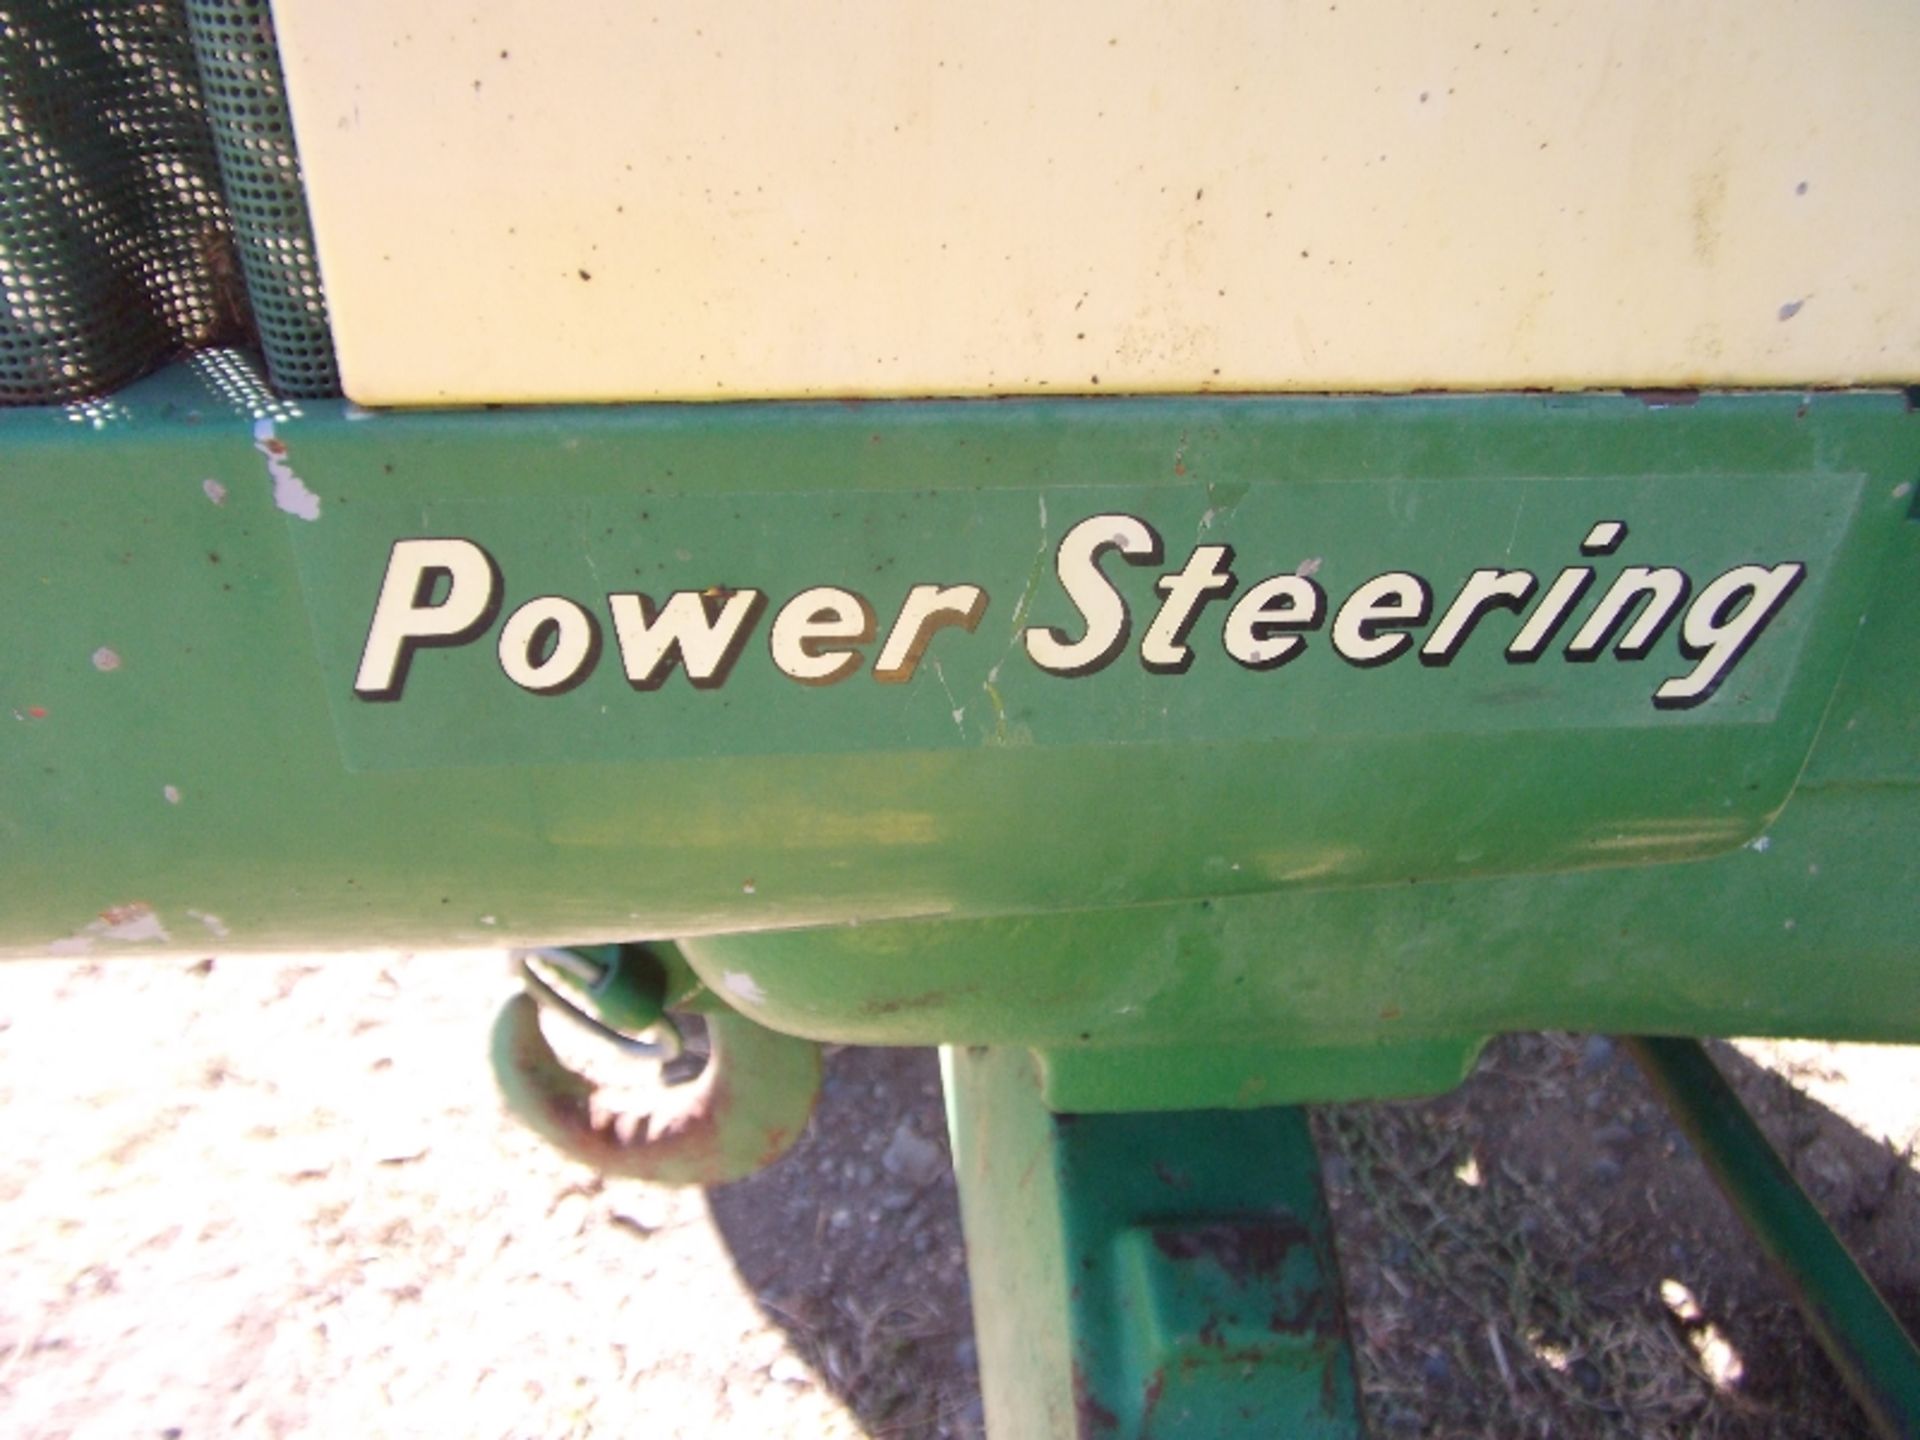 JD 820 diesel power steering 2 hyd remotes wide front pony start ser# 820491A 5299 hrs - Image 8 of 11